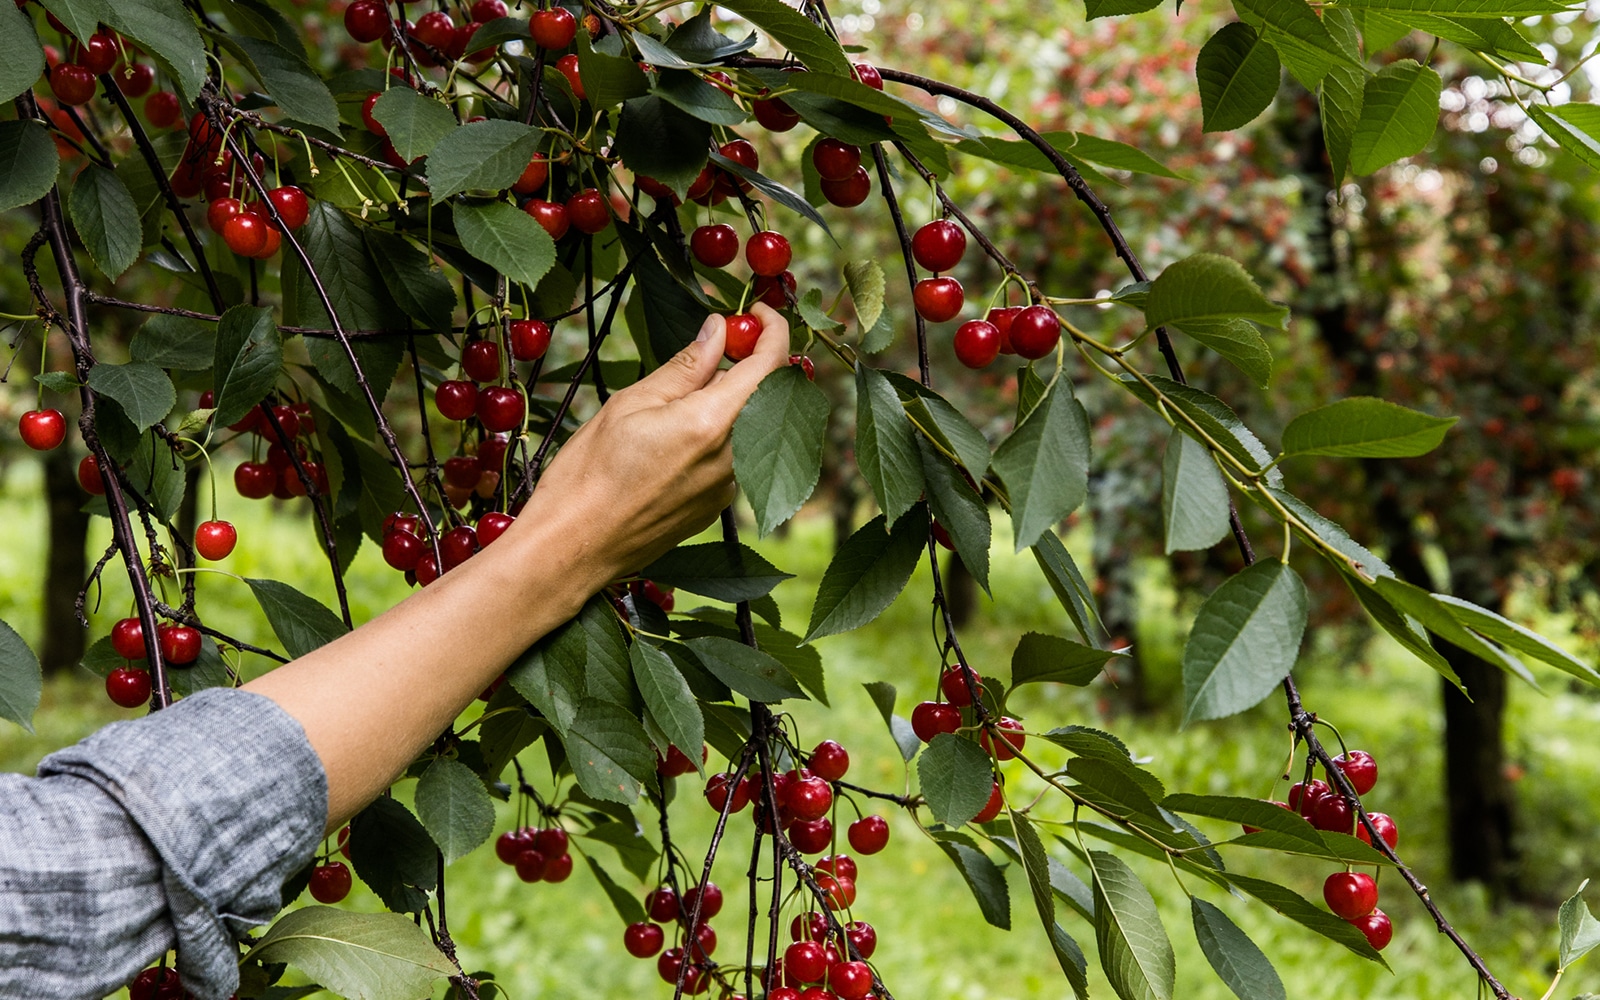 Touring a Tart Cherry Orchard in Northern Michigan with Montmorency Tart Cherries.